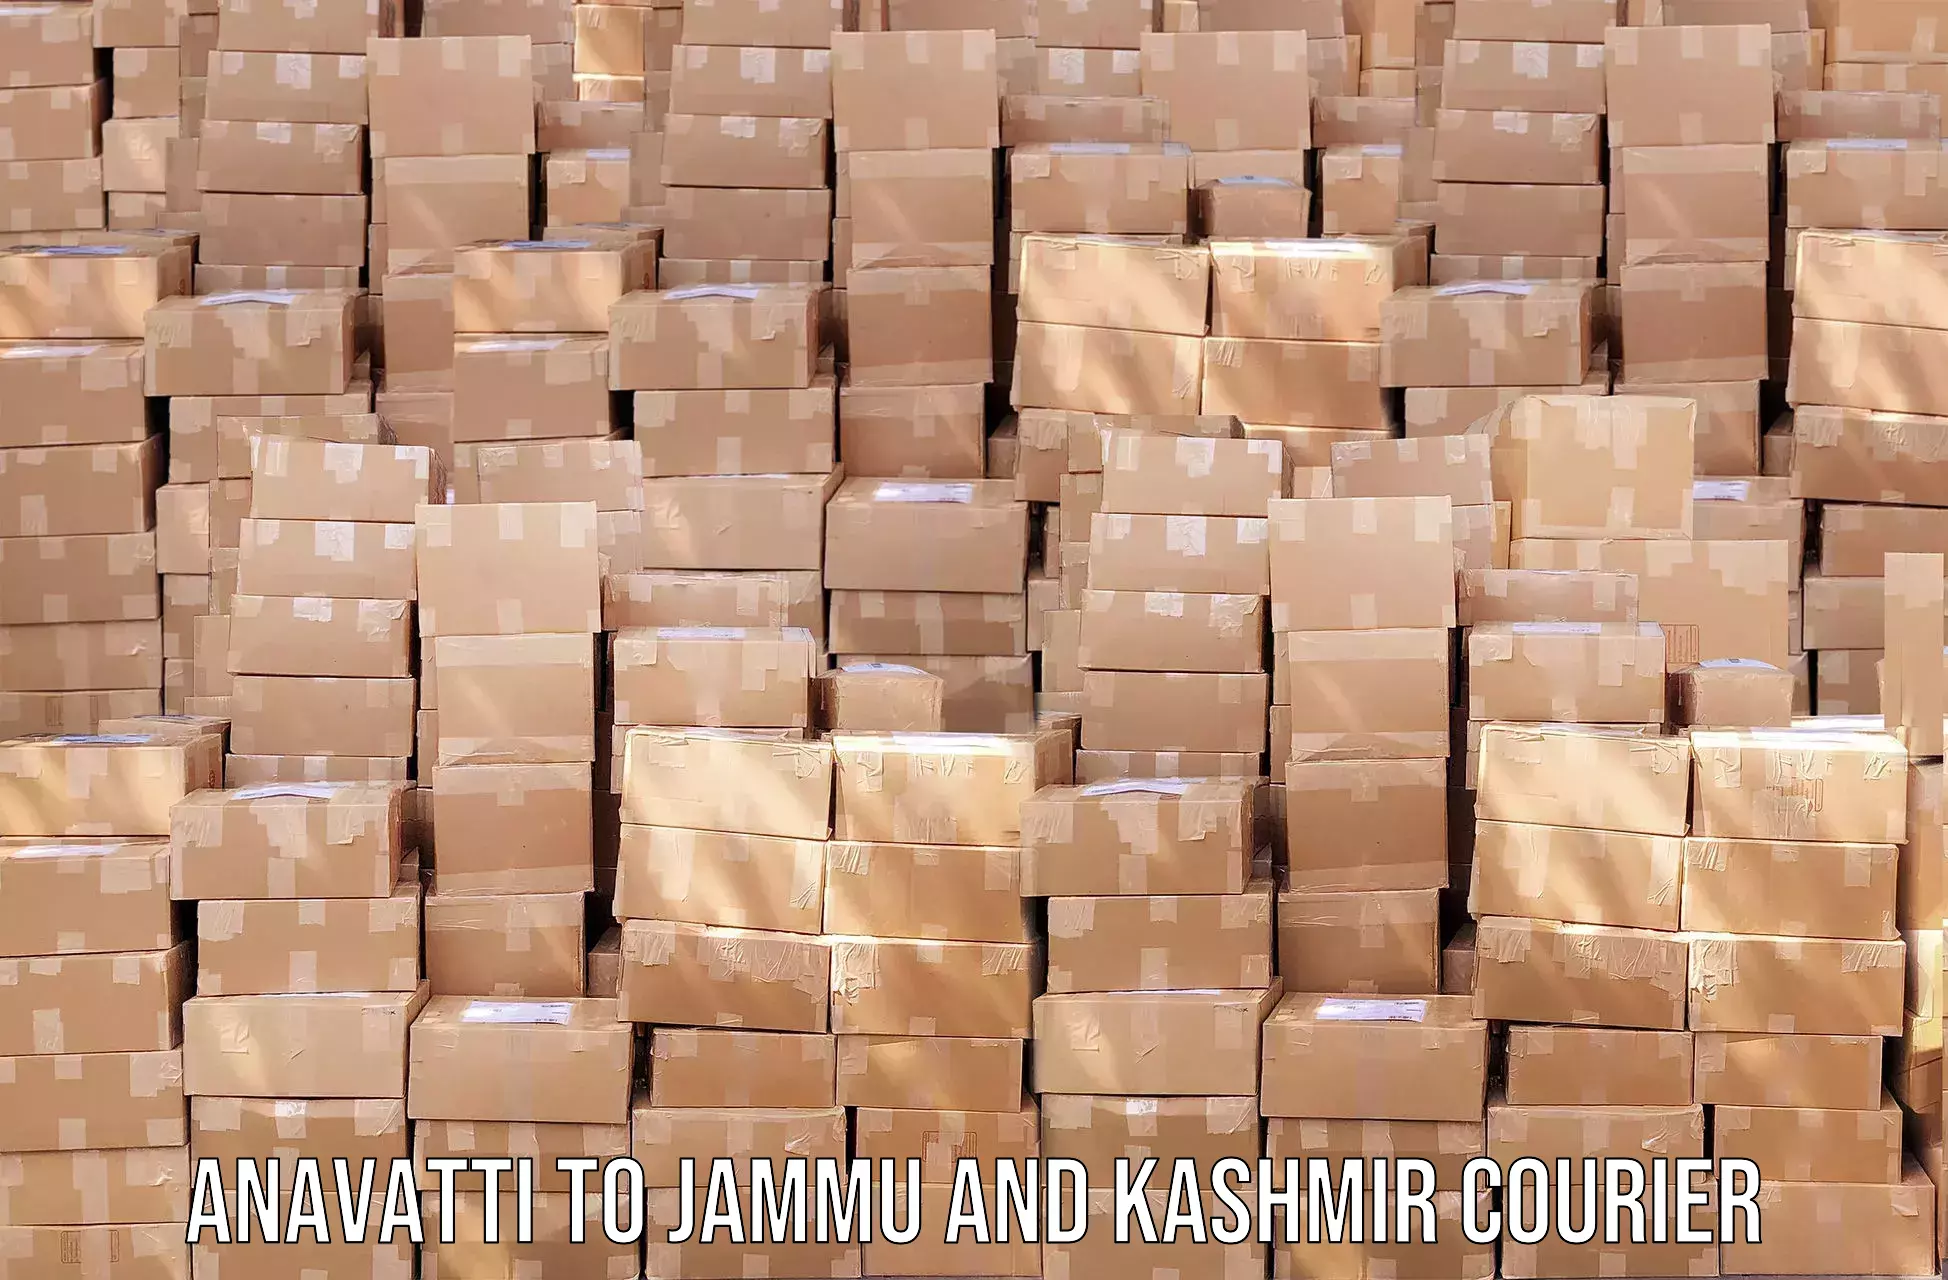 State-of-the-art courier technology Anavatti to Baramulla